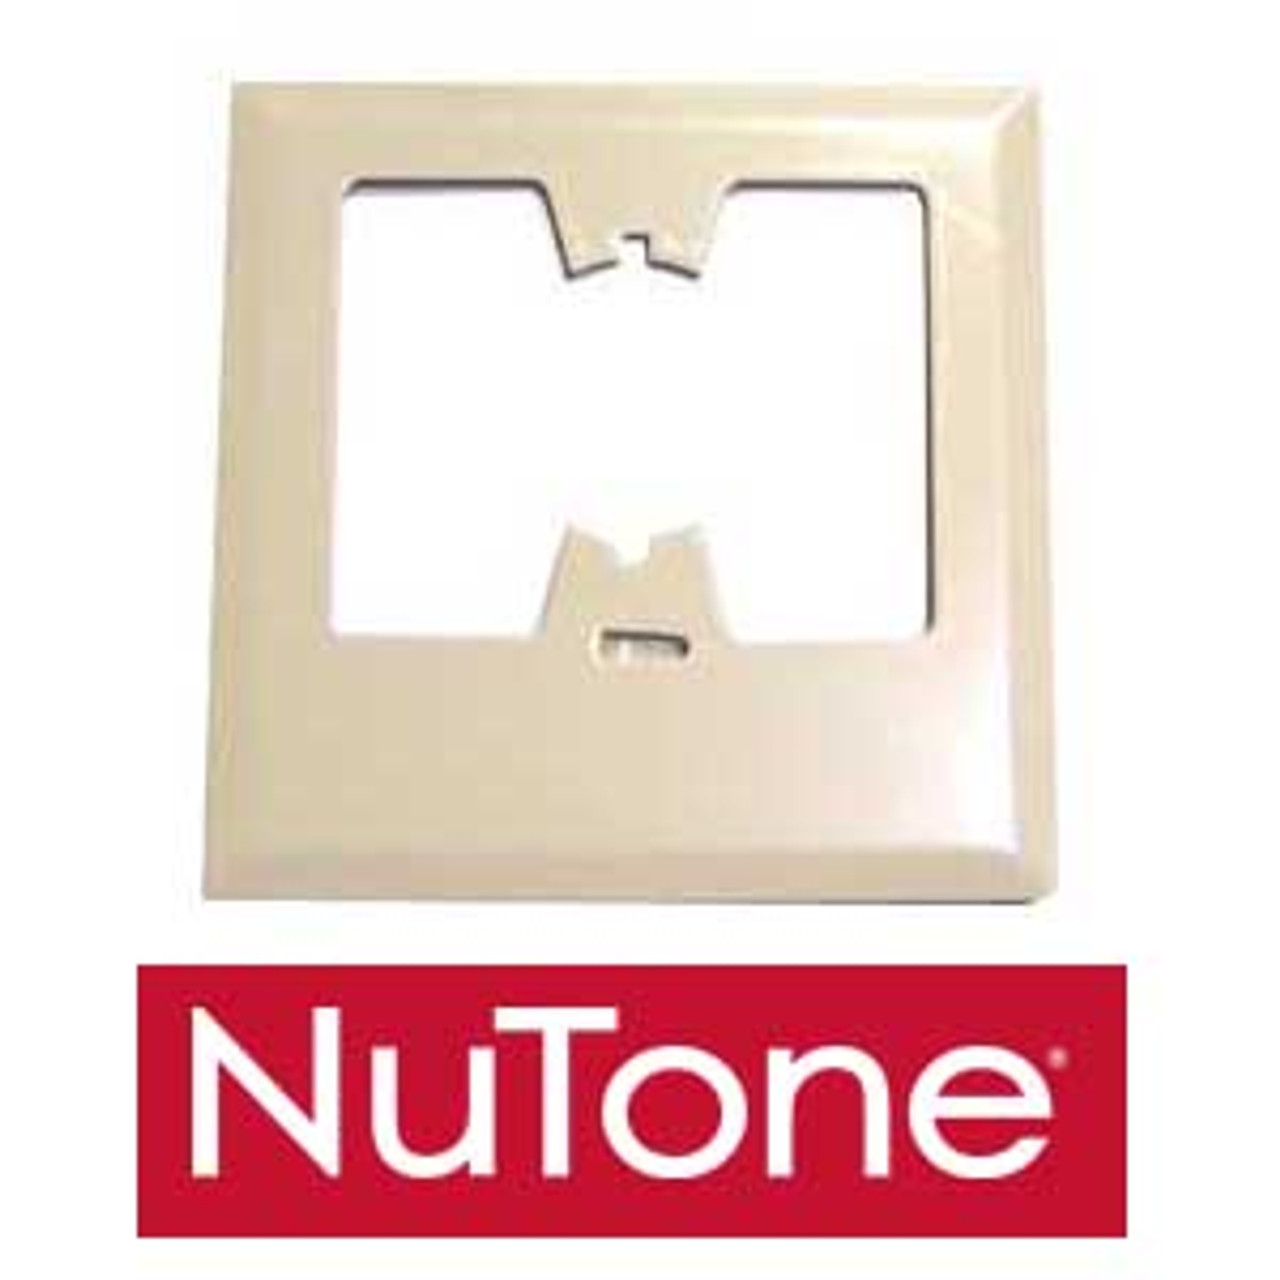 NuTone 397 - Wall Inlet Frame for Central Vacuum System